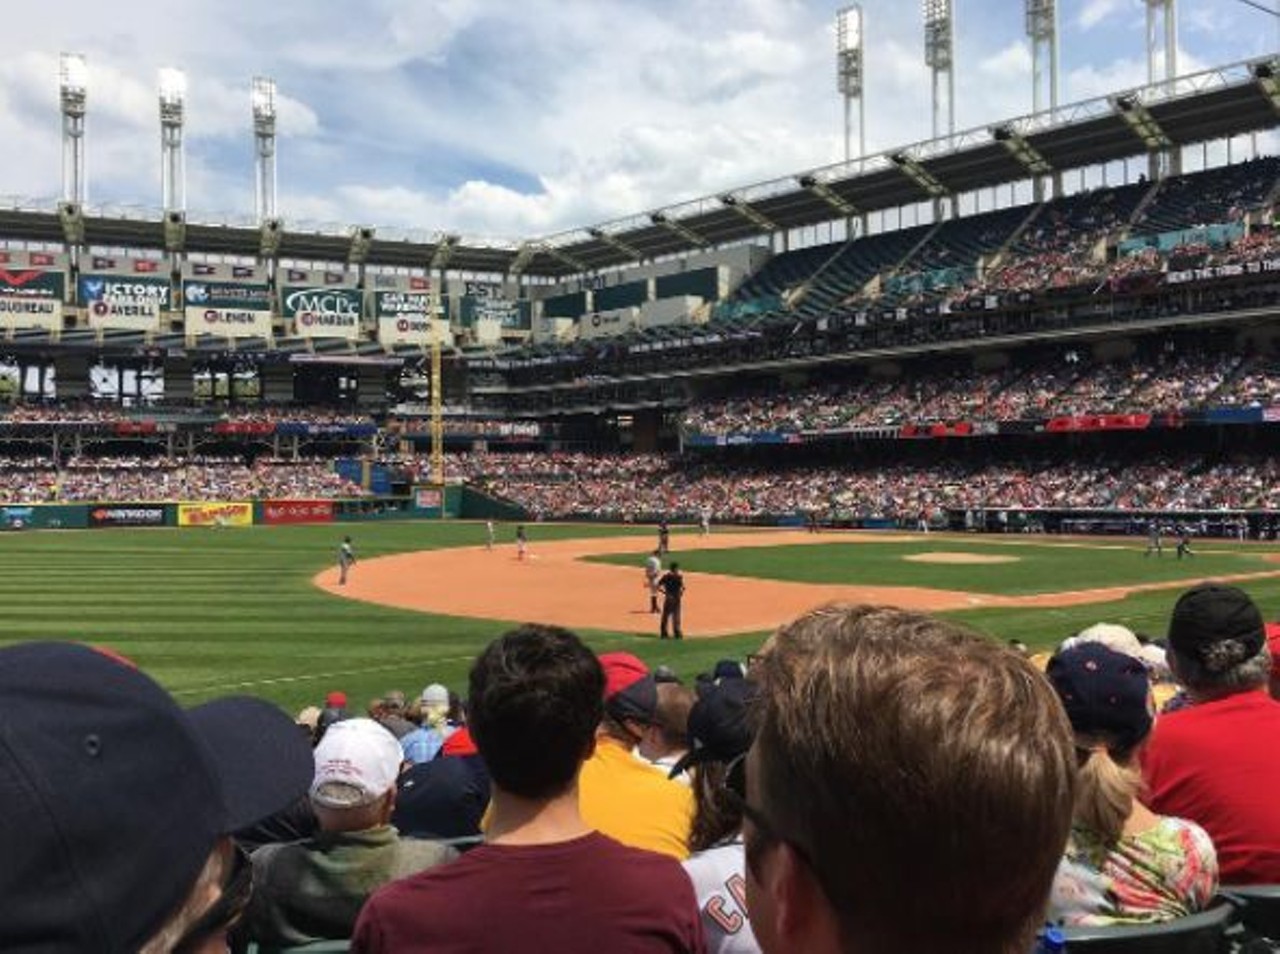  Go to an Indians Game
All summer
Progressive Field
What better way to reaffirm your love for Cleveland during the summer than supporting the Tribe? Let the dozens of games left in the season fill the void the Cavs left on June 12.
Photo via kbrown_1990/Instagram